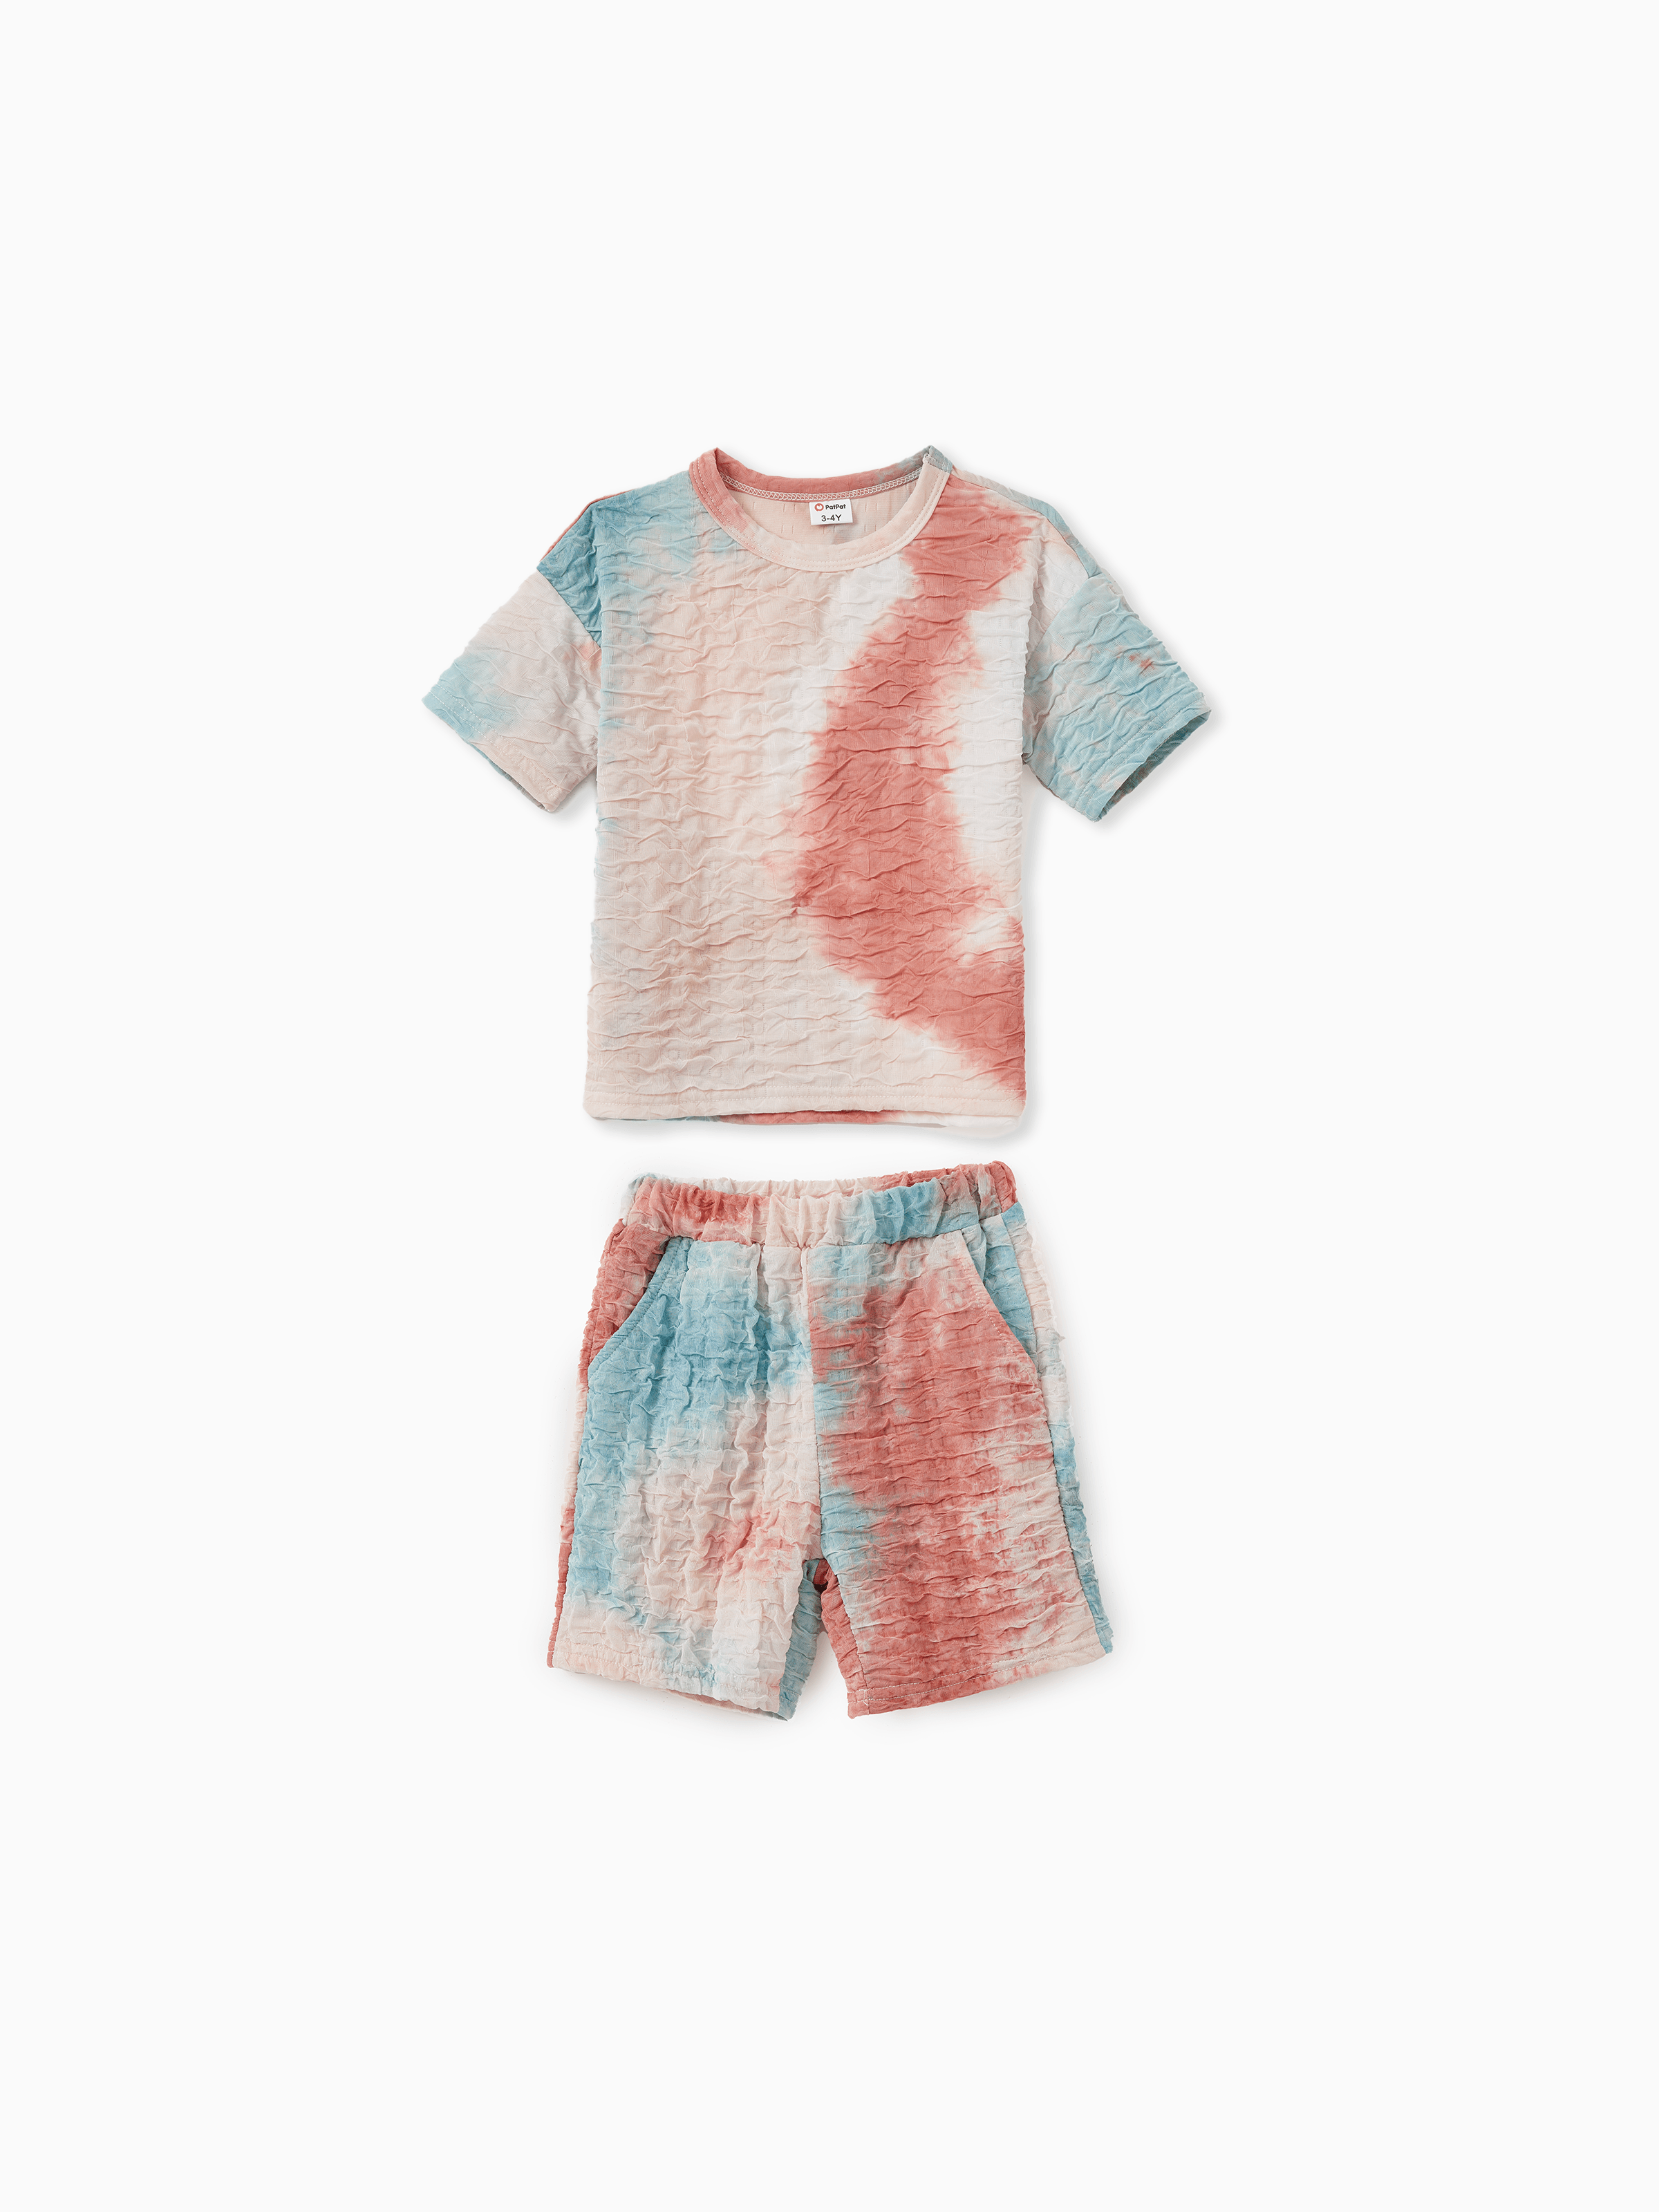 

Mommy and Me Matching Sets Short Sleeves Tie-Dye Textured Fabric Top and Shorts with Pockets